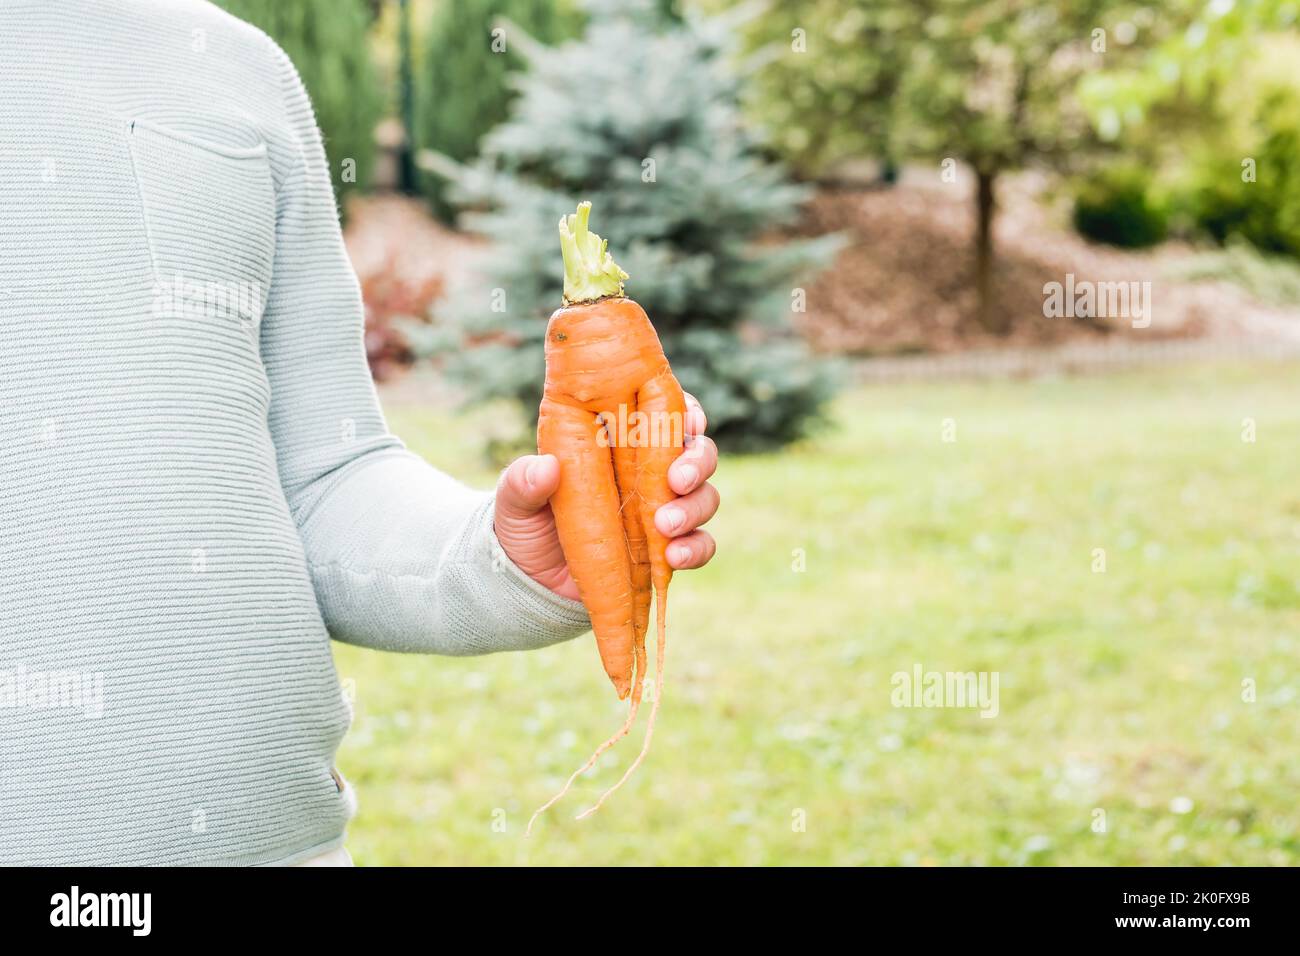 Vegetable with strange shape in hand of child. Boy standing in the garden and showing imperfect piece of home grown carrot. Beta carotene source. Stock Photo